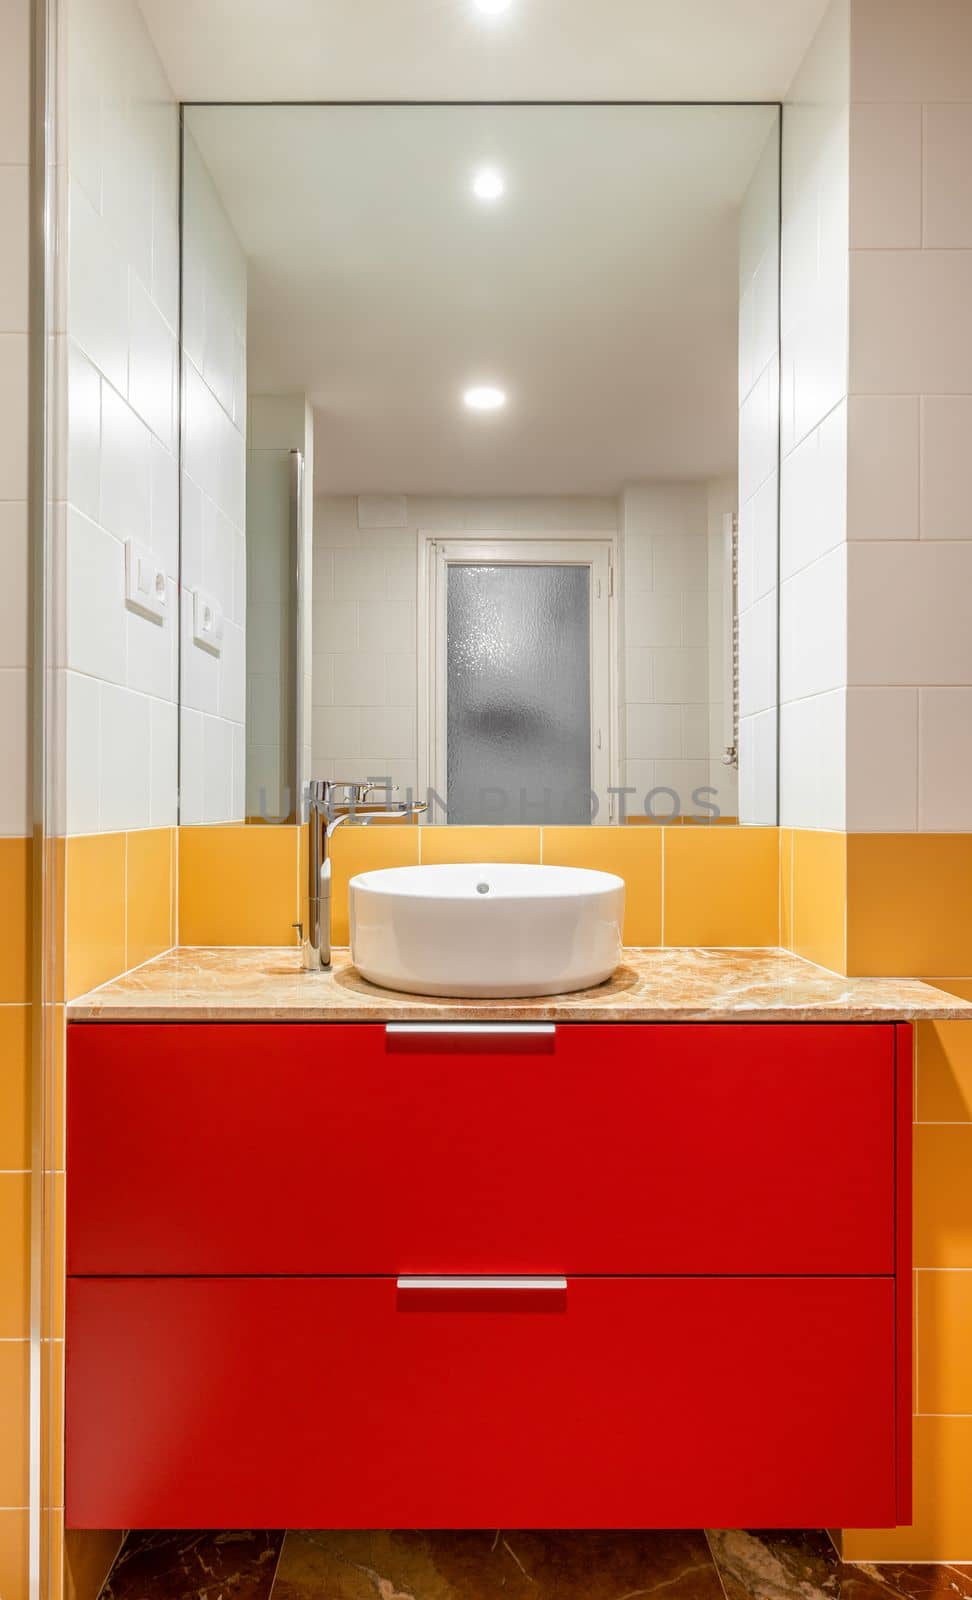 New empty bathroom with yellow tiles and round sink on red furniture by apavlin